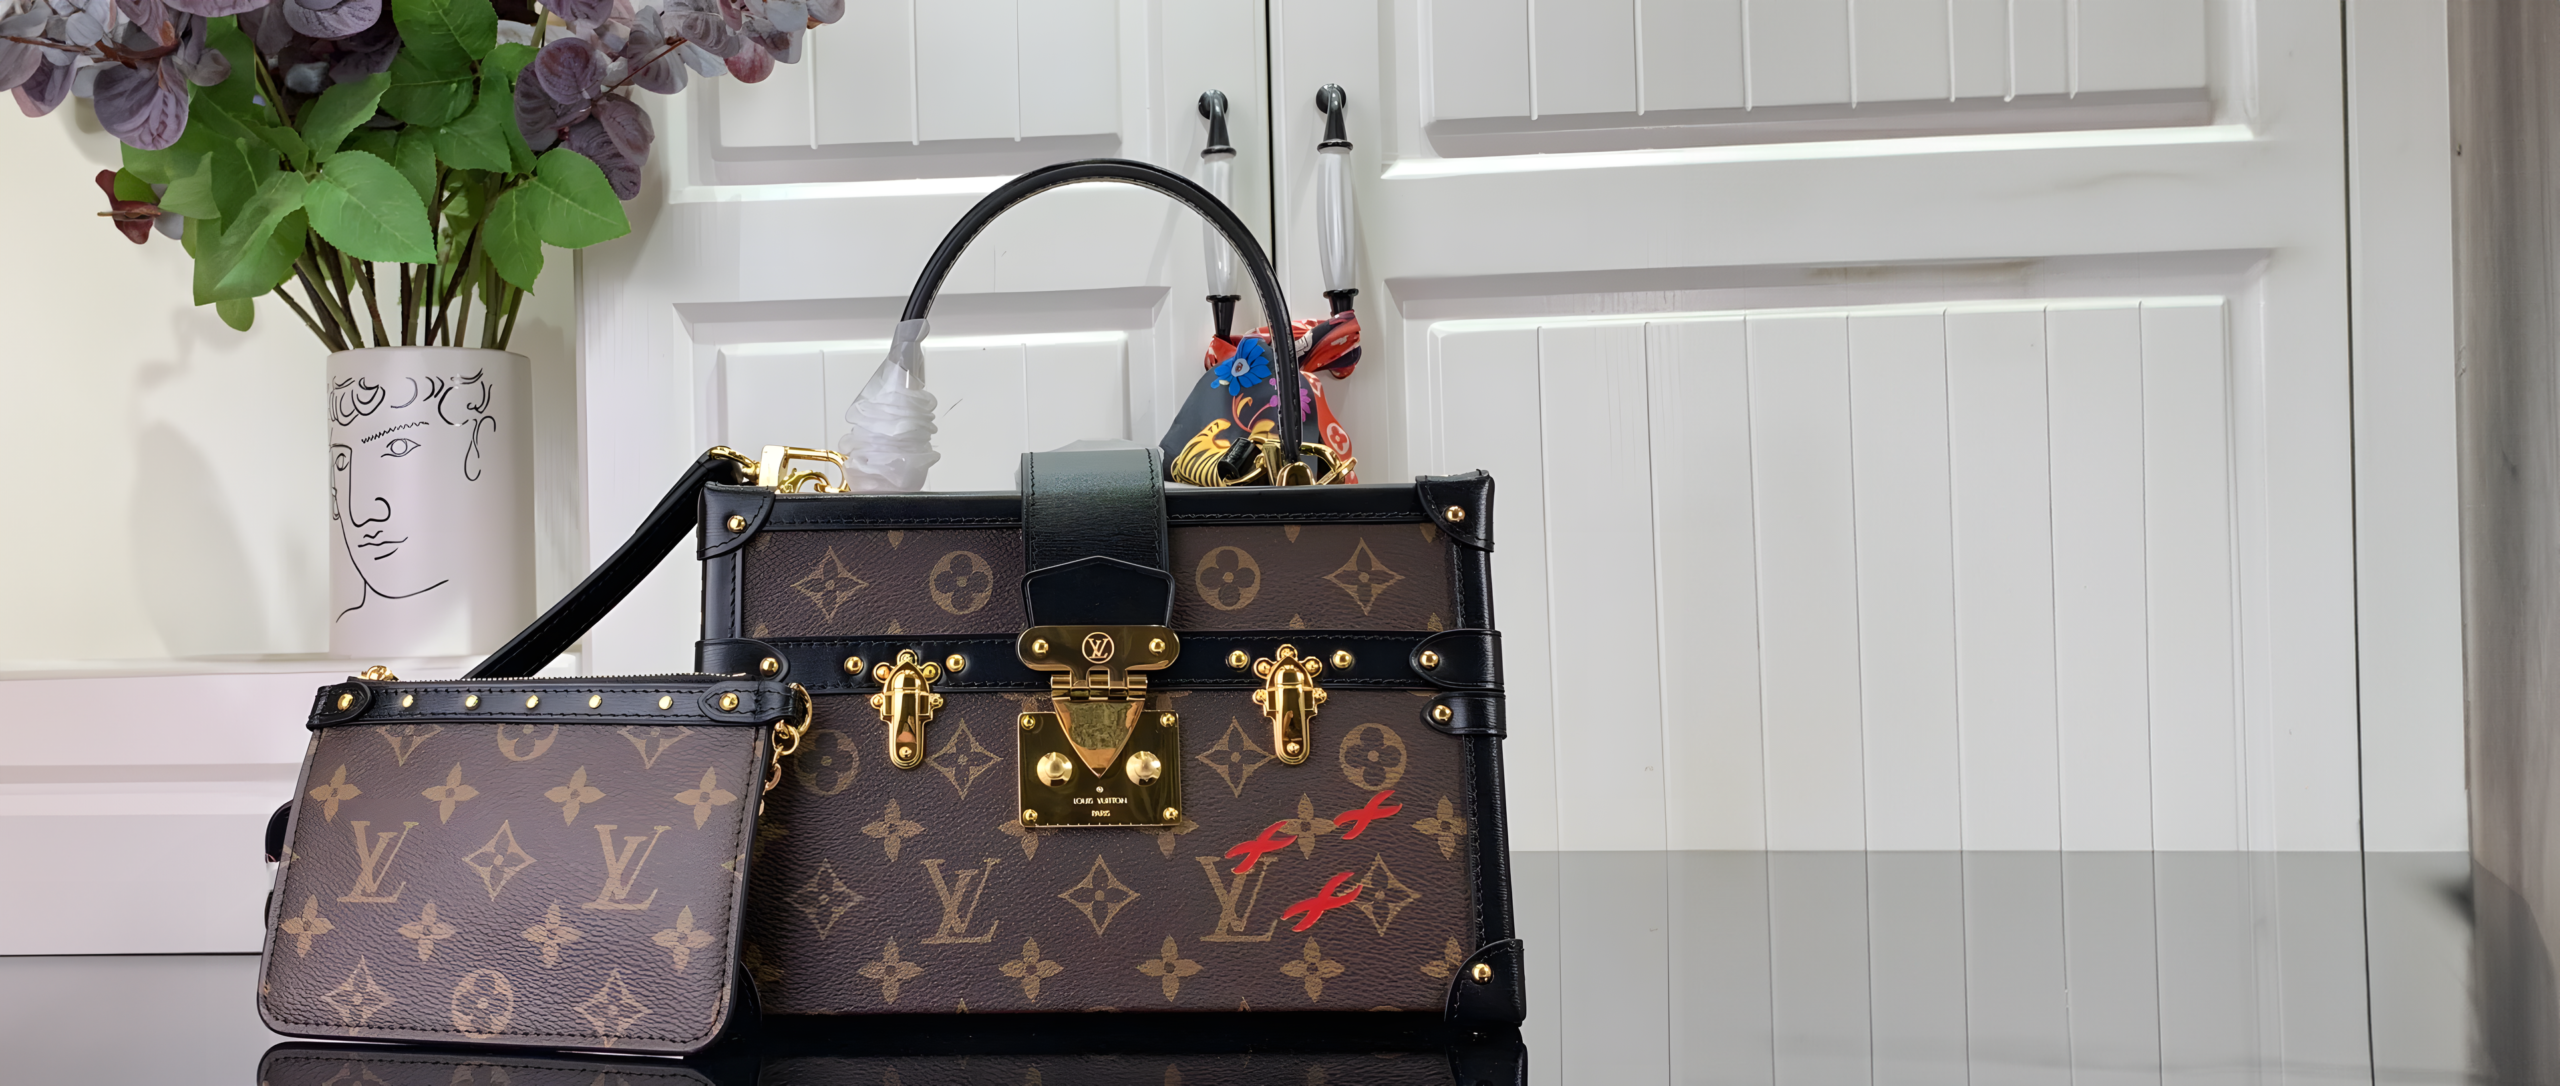 louis-vuitton_upscay-1-scaled